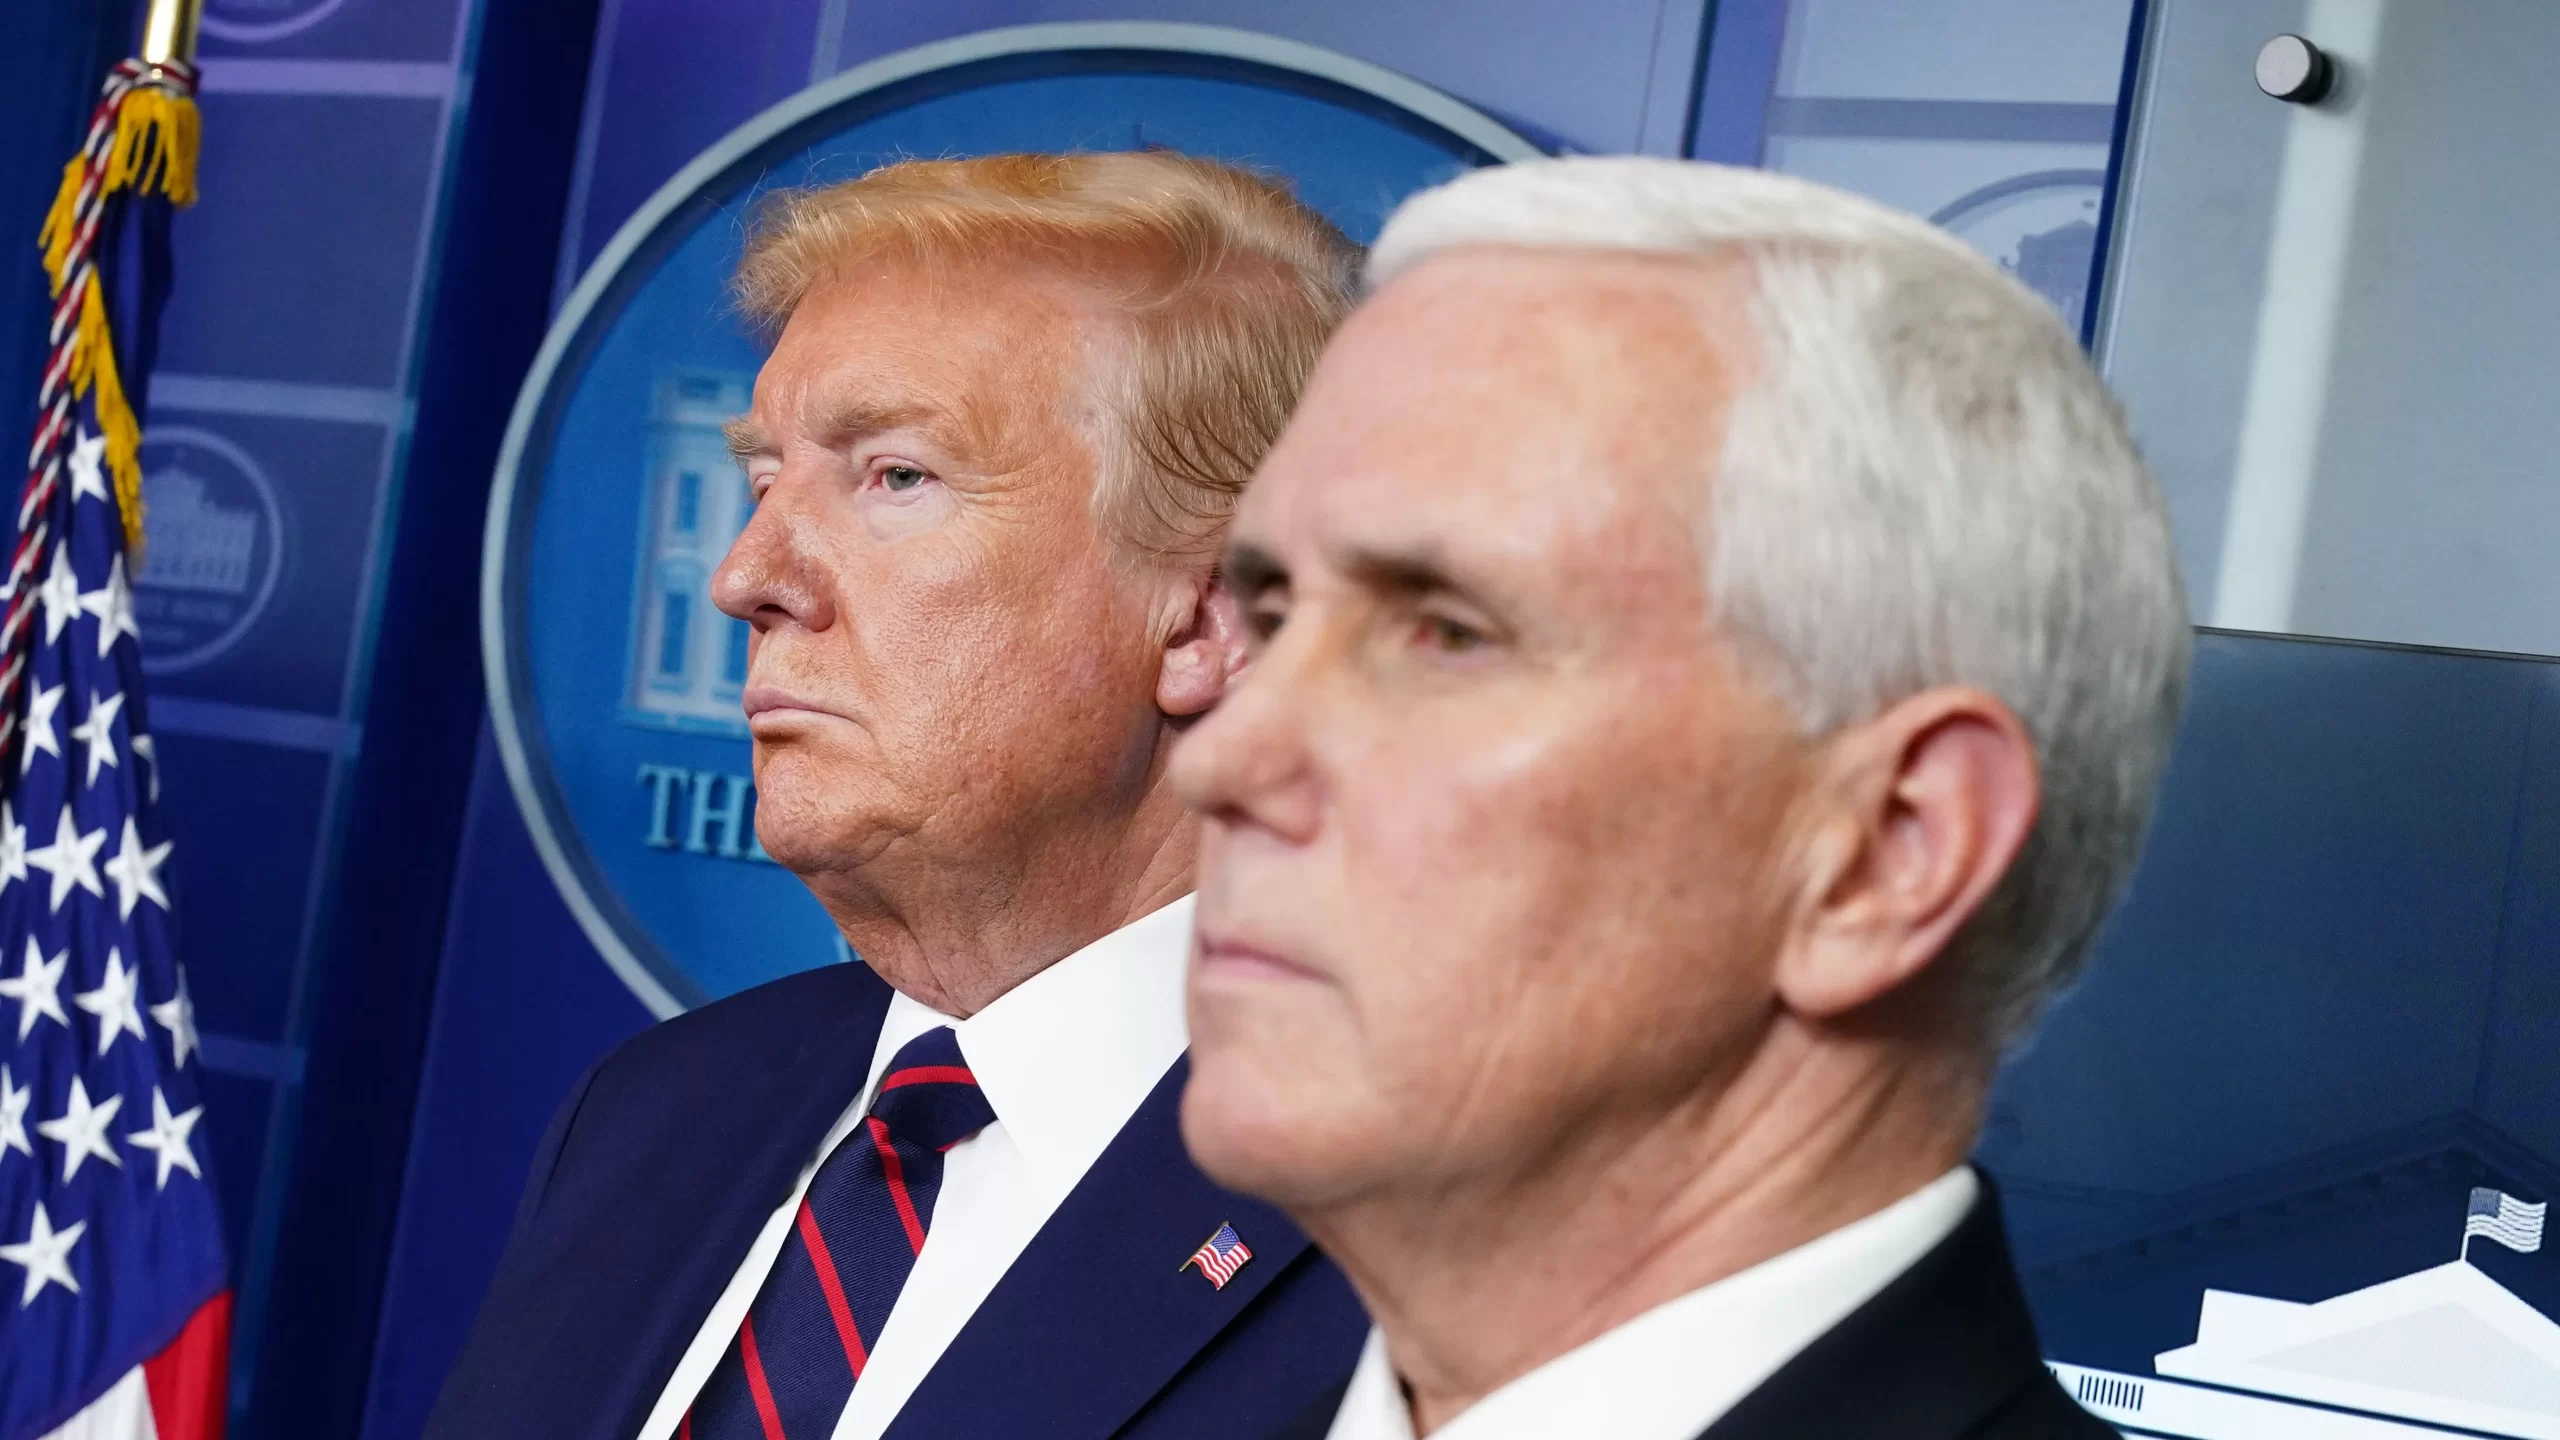 Trump Disregards Pence's Refusal to Endorse: Calls for Strong Leadership Amidst Nation's Challenges